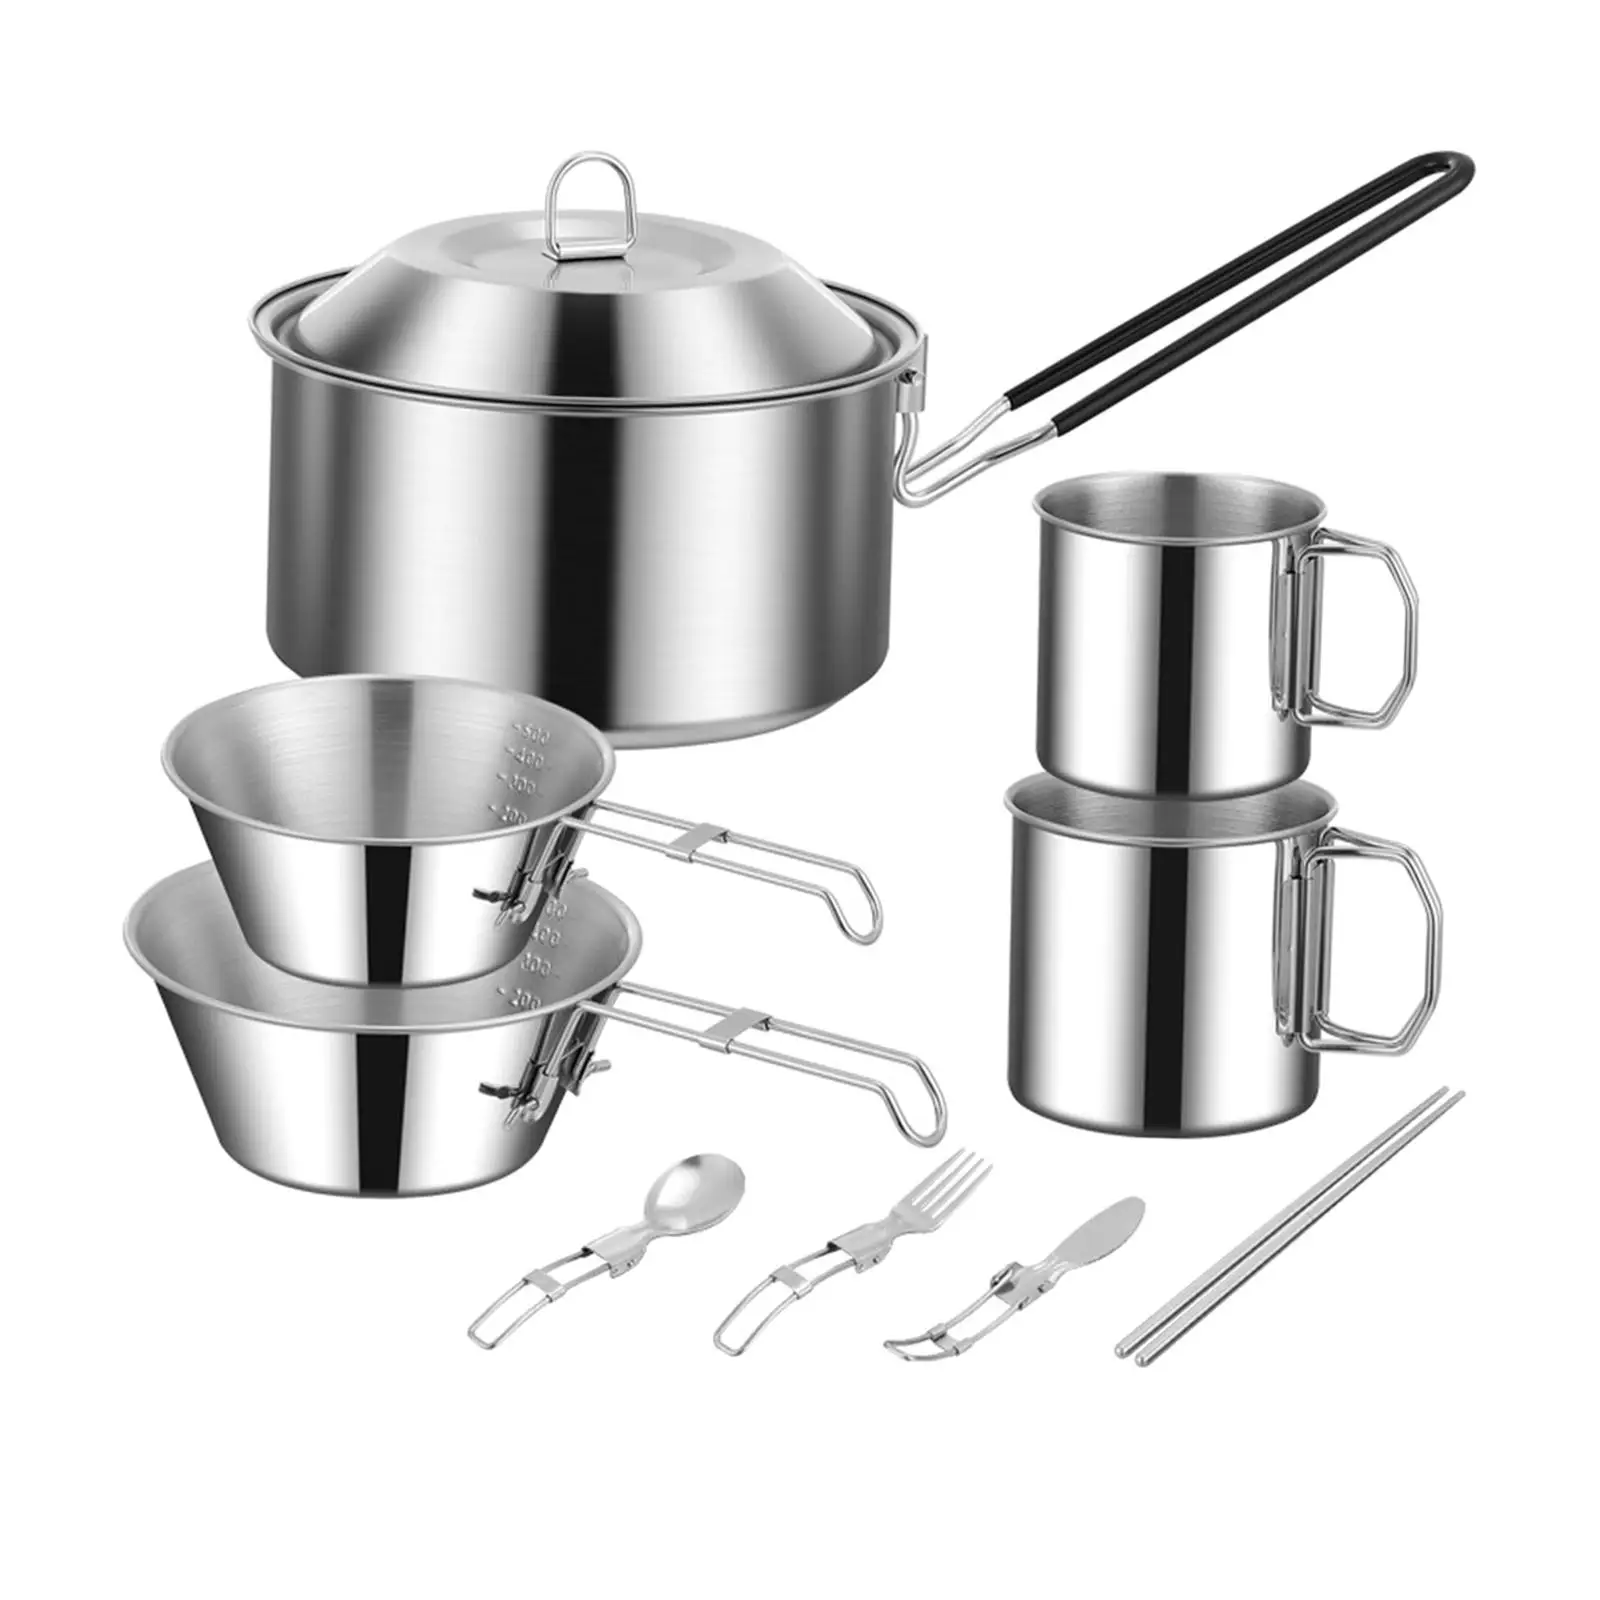 Stainless Steel Cooking Pot Set Camping Foldable Tableware for BBQ Accessories Barbecue